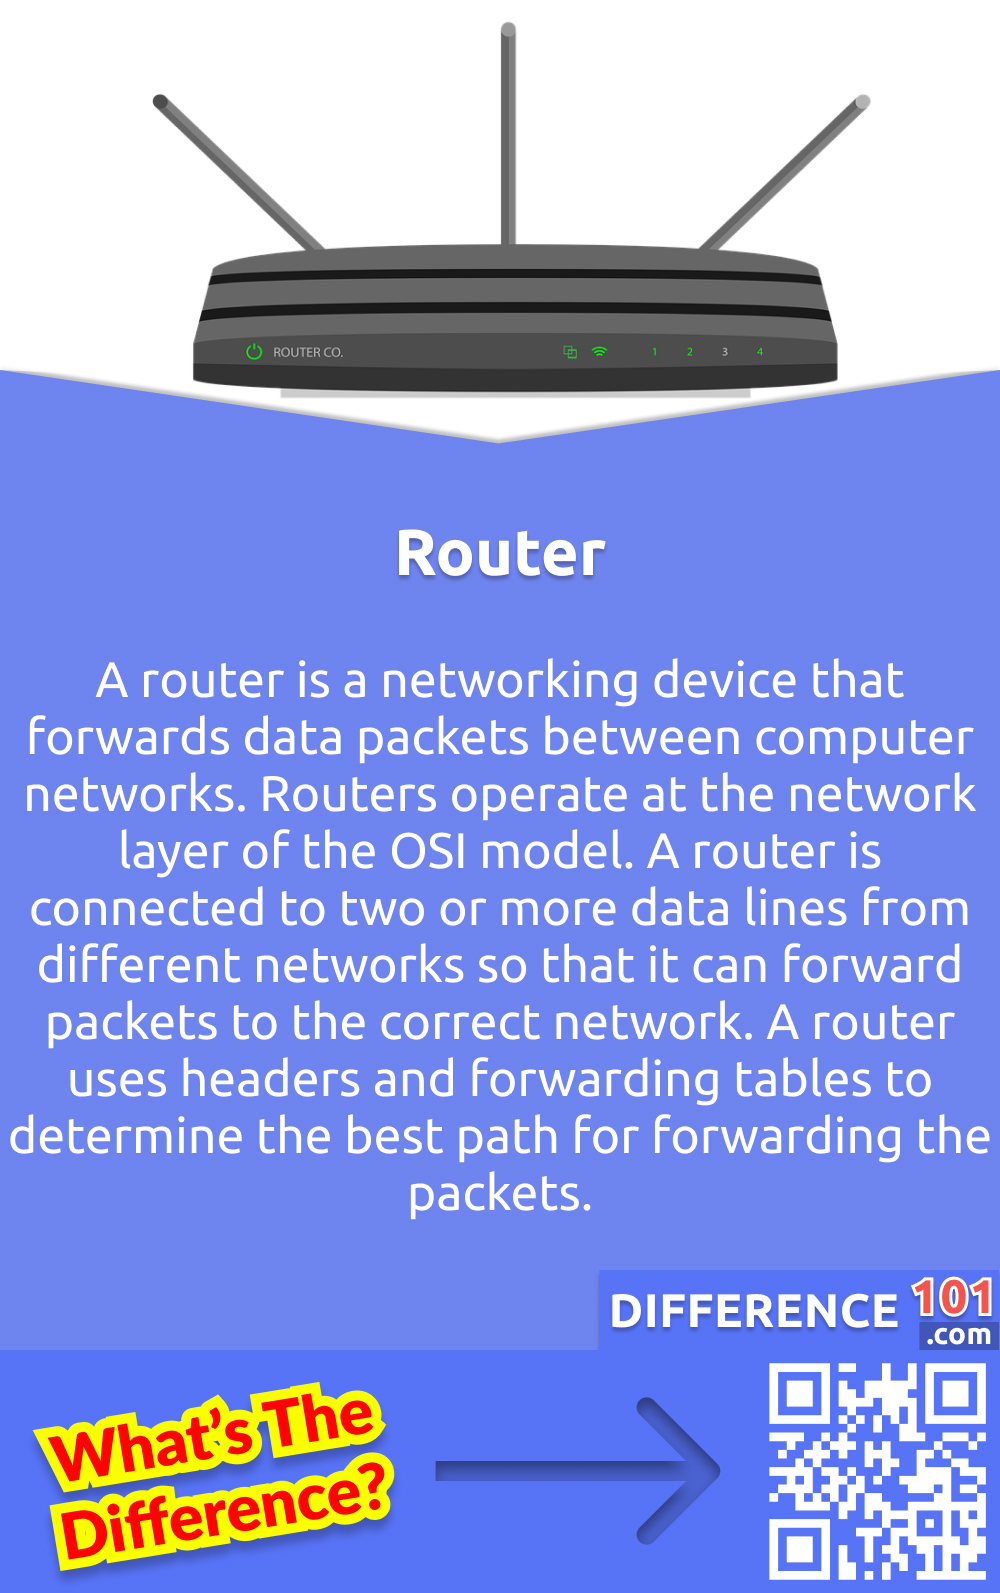 What Is Router? A router is a networking device that forwards data packets between computer networks. Routers operate at the network layer of the OSI model. A router is connected to two or more data lines from different networks so that it can forward packets to the correct network. A router uses headers and forwarding tables to determine the best path for forwarding the packets.
